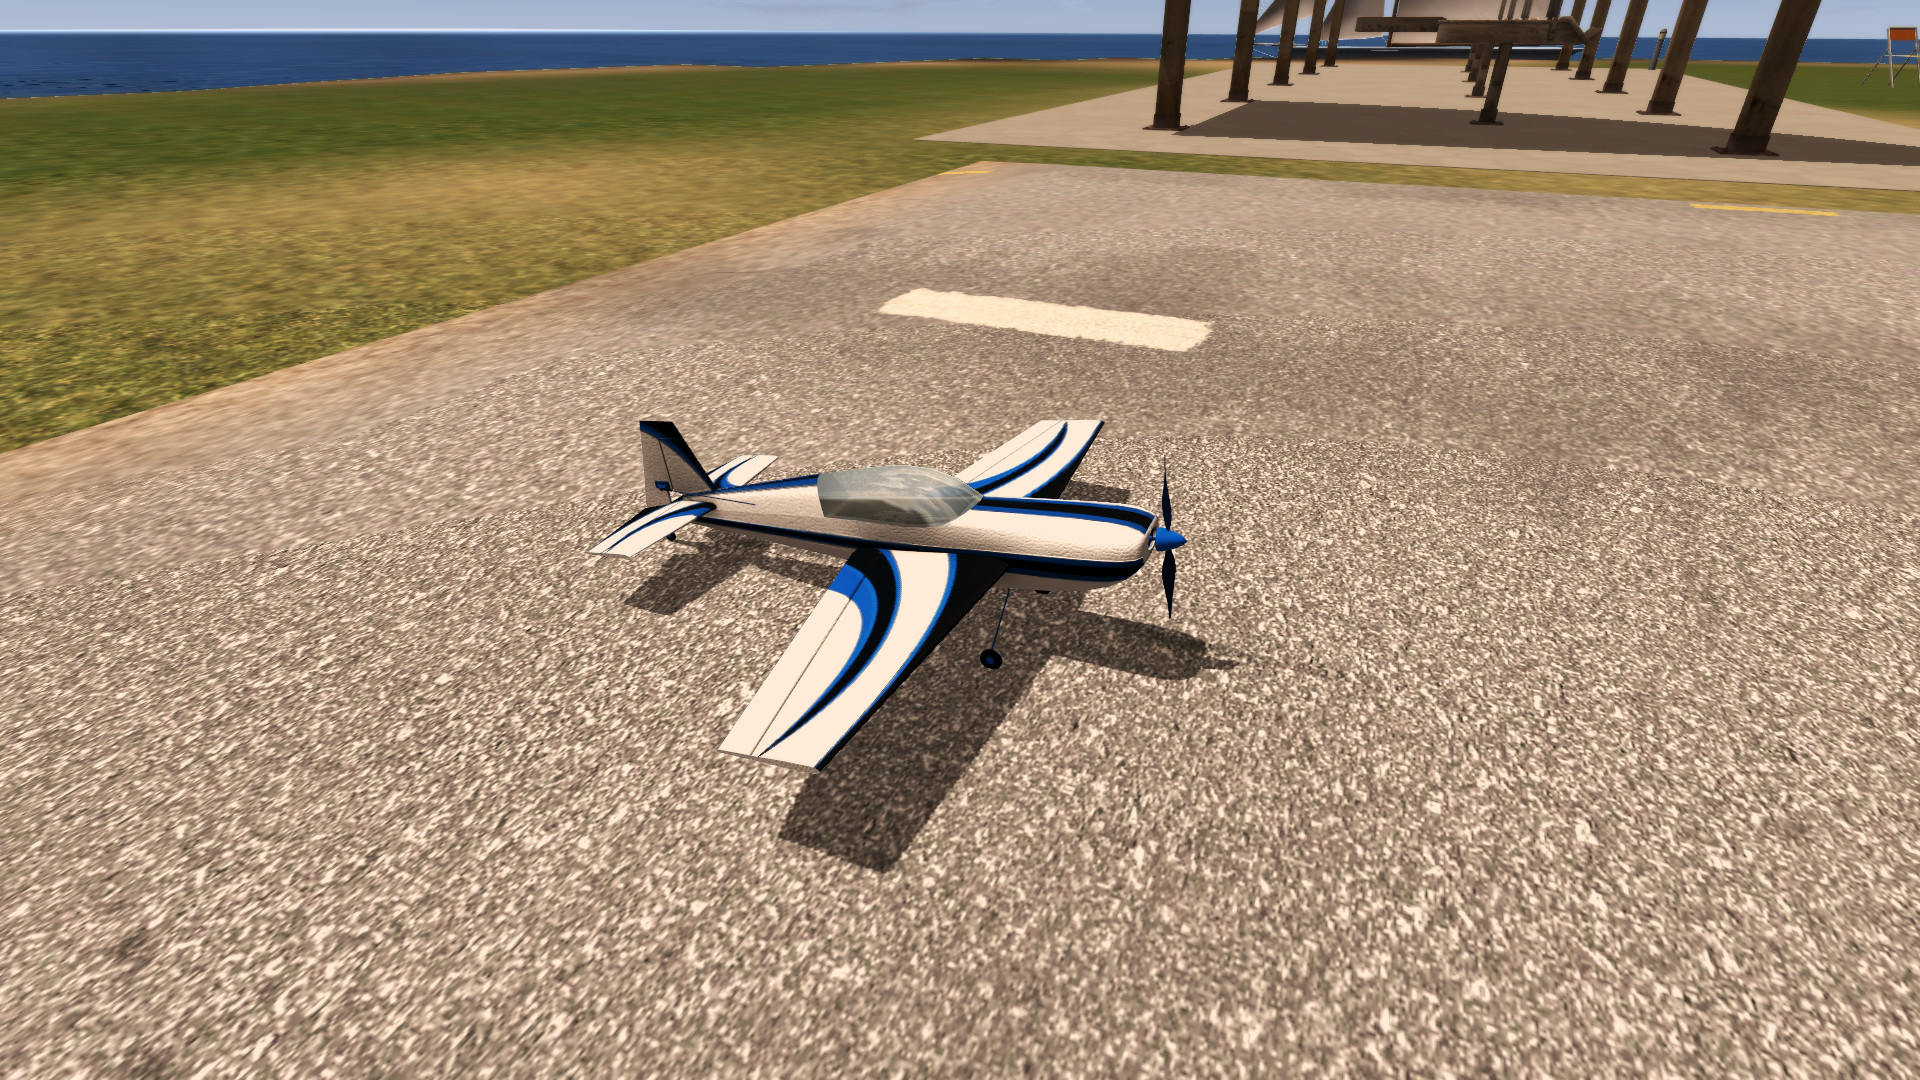 Extreme Plane Stunts Simulator download the new version for android